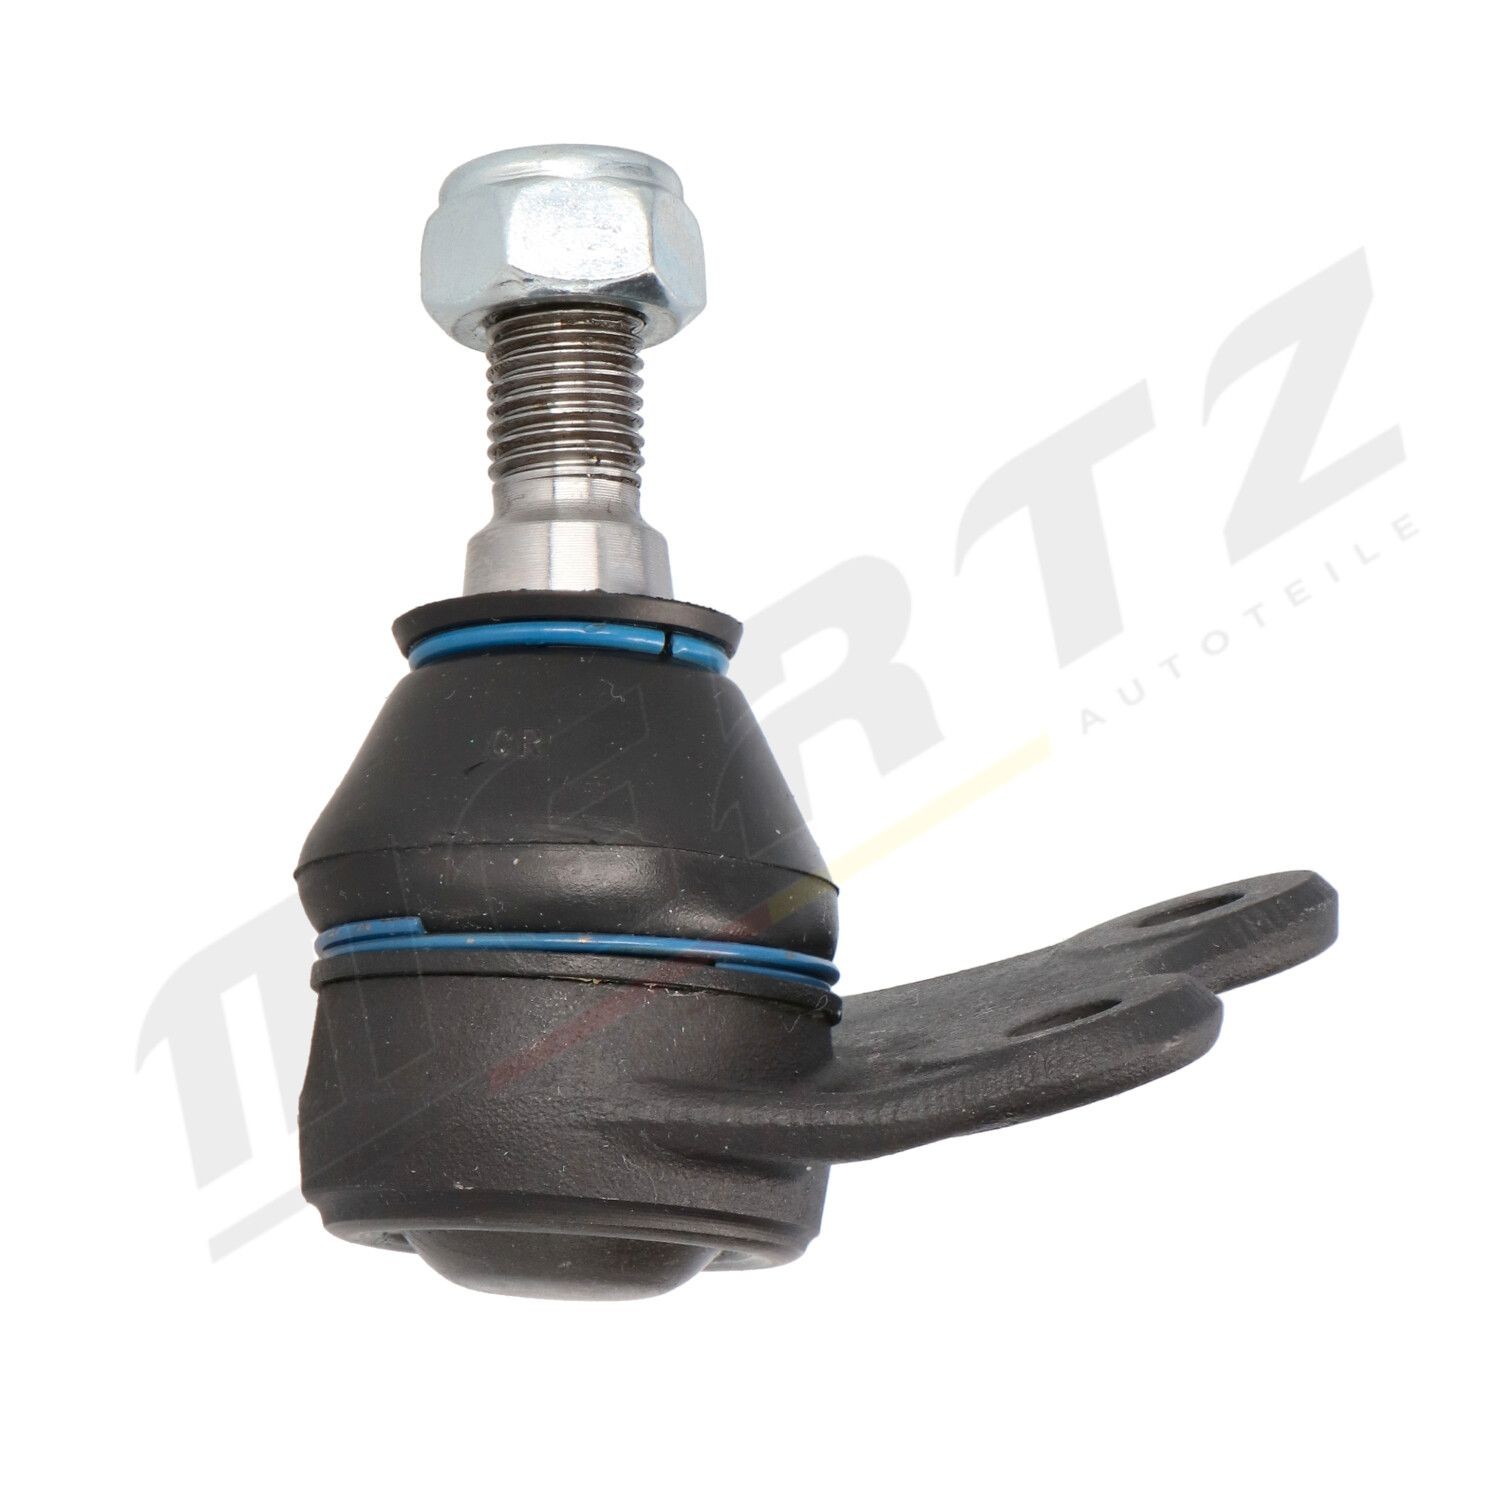 M-S0191 Suspension ball joint M-S0191 MERTZ Front Axle Right, with nut, 15,8mm, M12x1,5mm